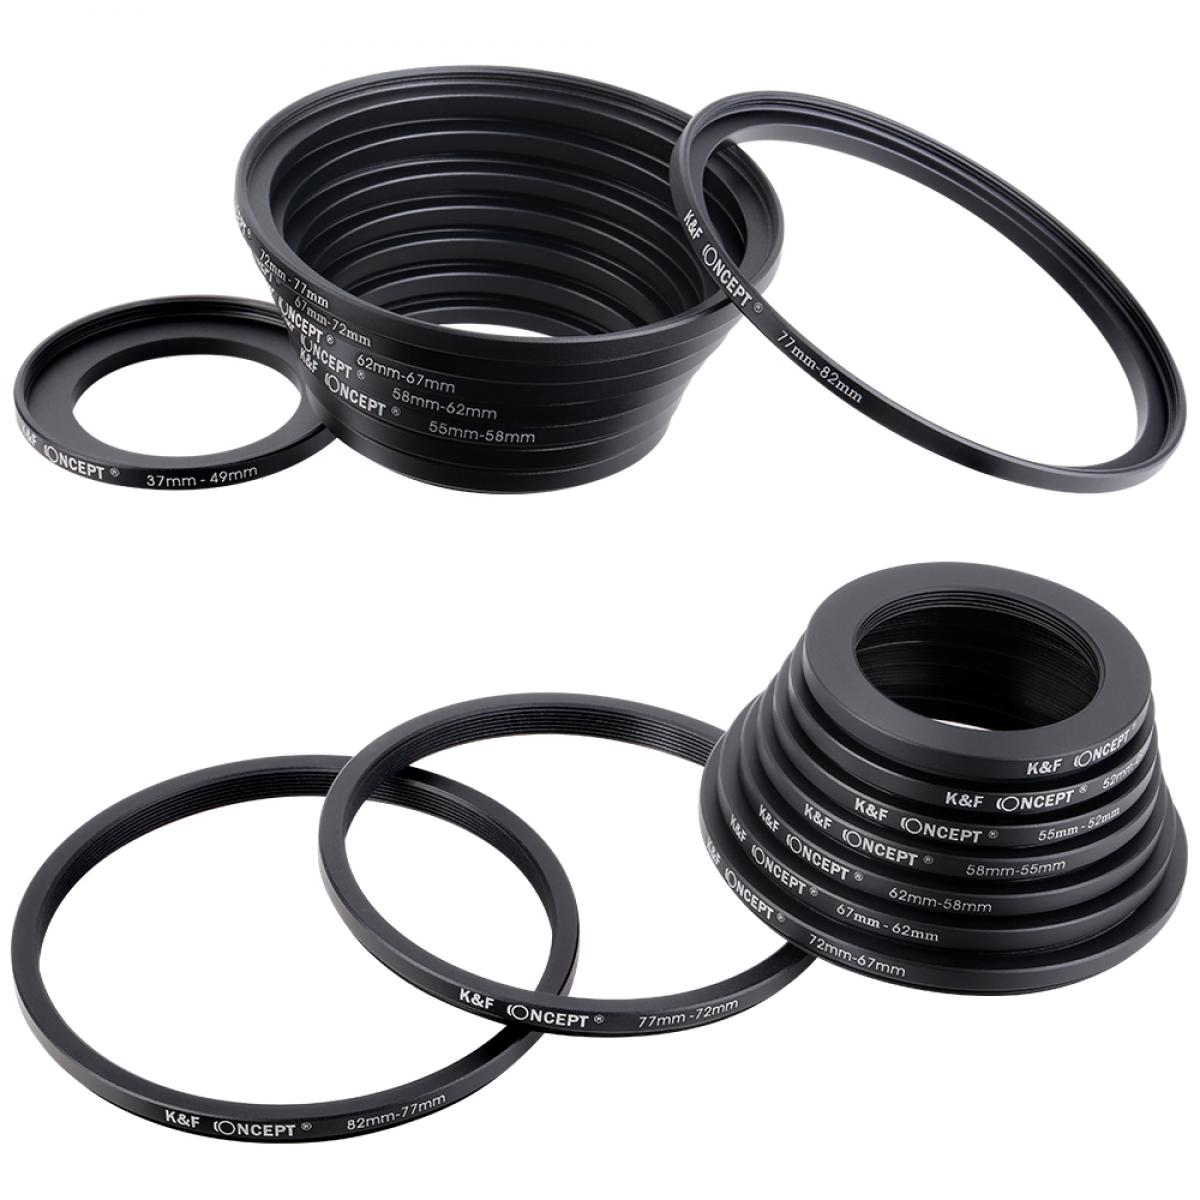 18 in 1 lensfilter Step Ring Set 9st Step Up Ring 9st Step Down Ring